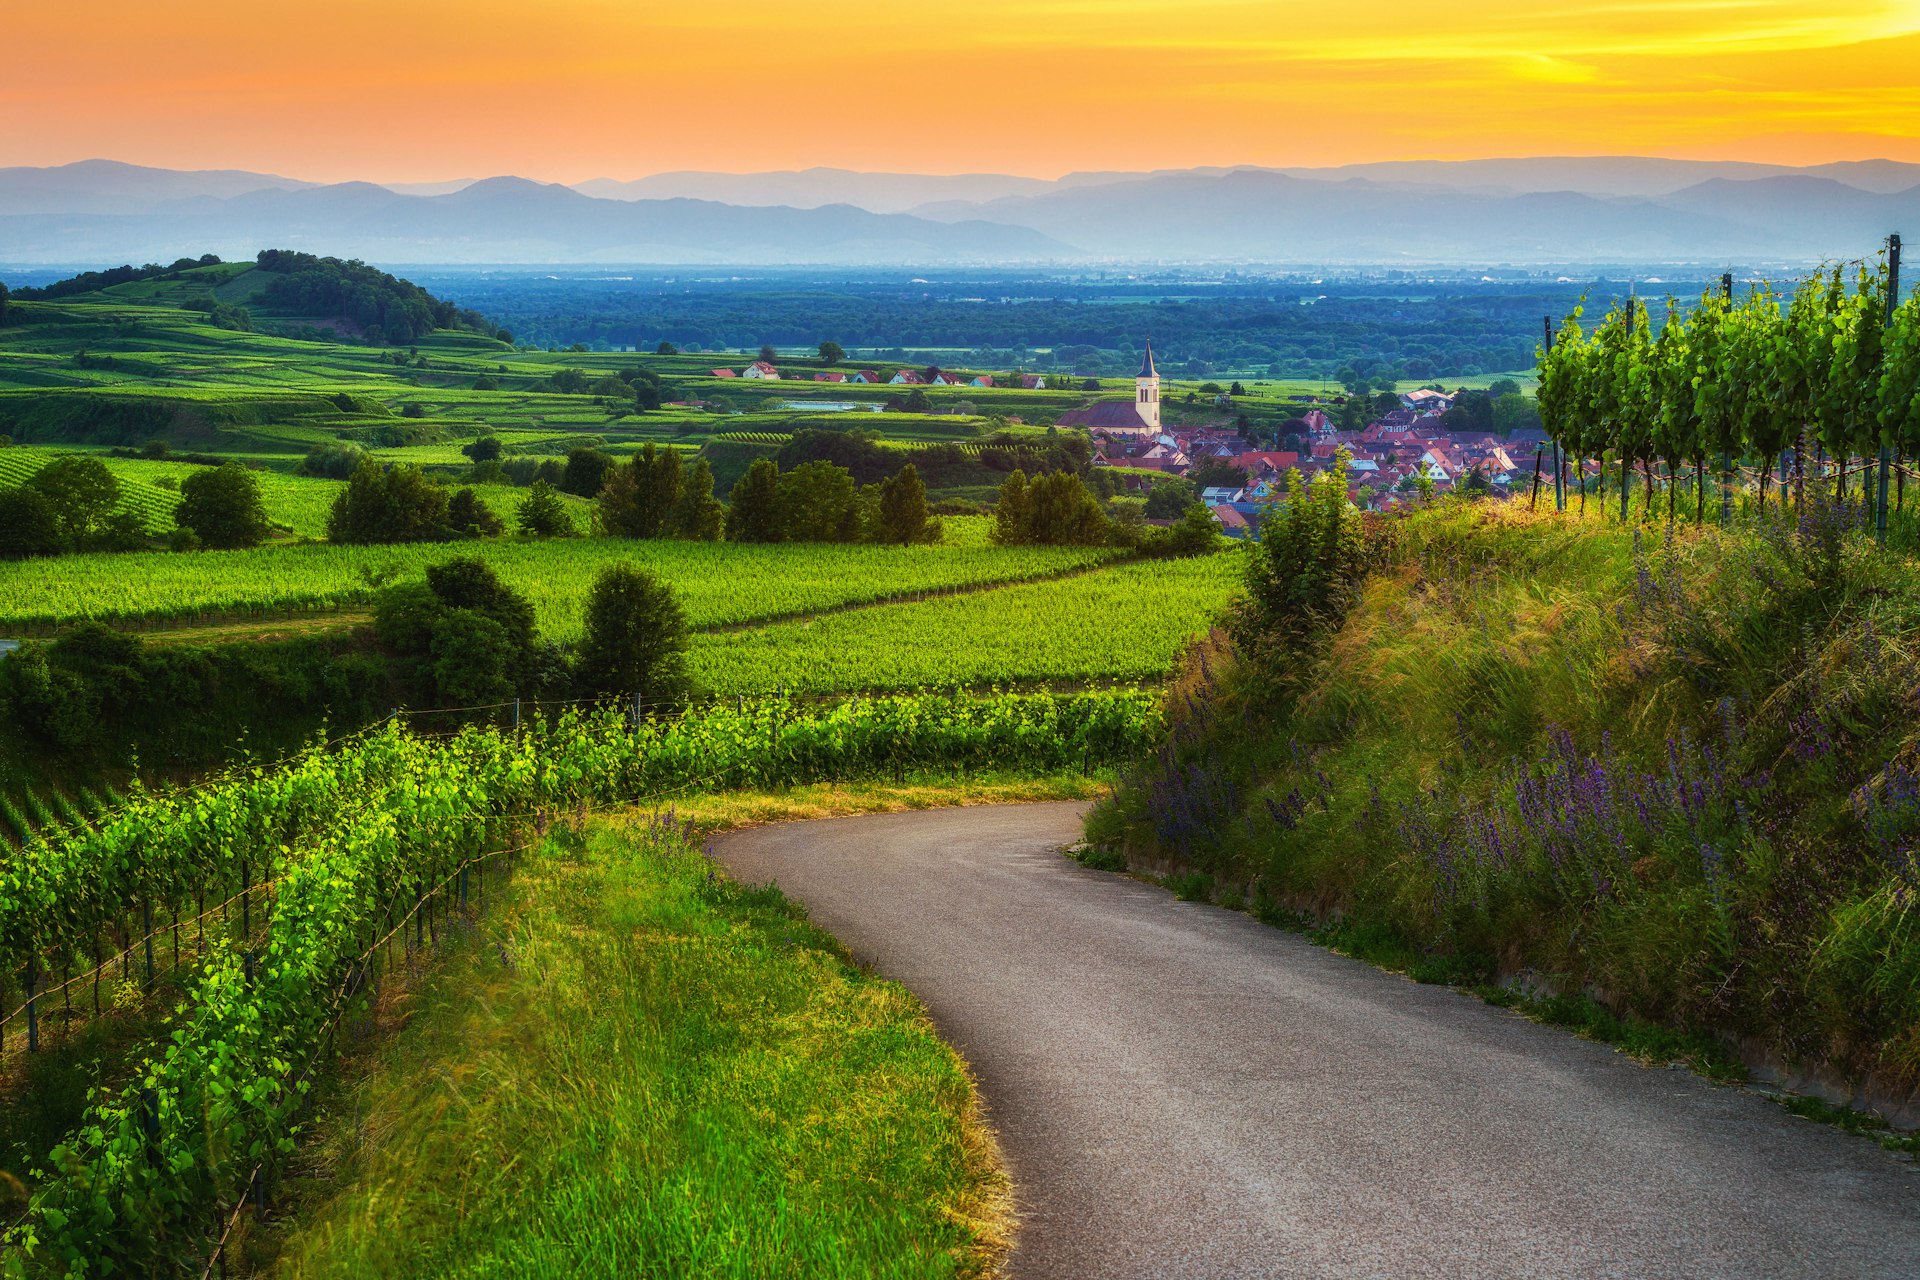 Beautiful scenic view of a picturesque historic town with vineyards and old church in Germany at sunset. Black forest, Kaiserstuhl, Oberrotweil. Travel and wine-making background.